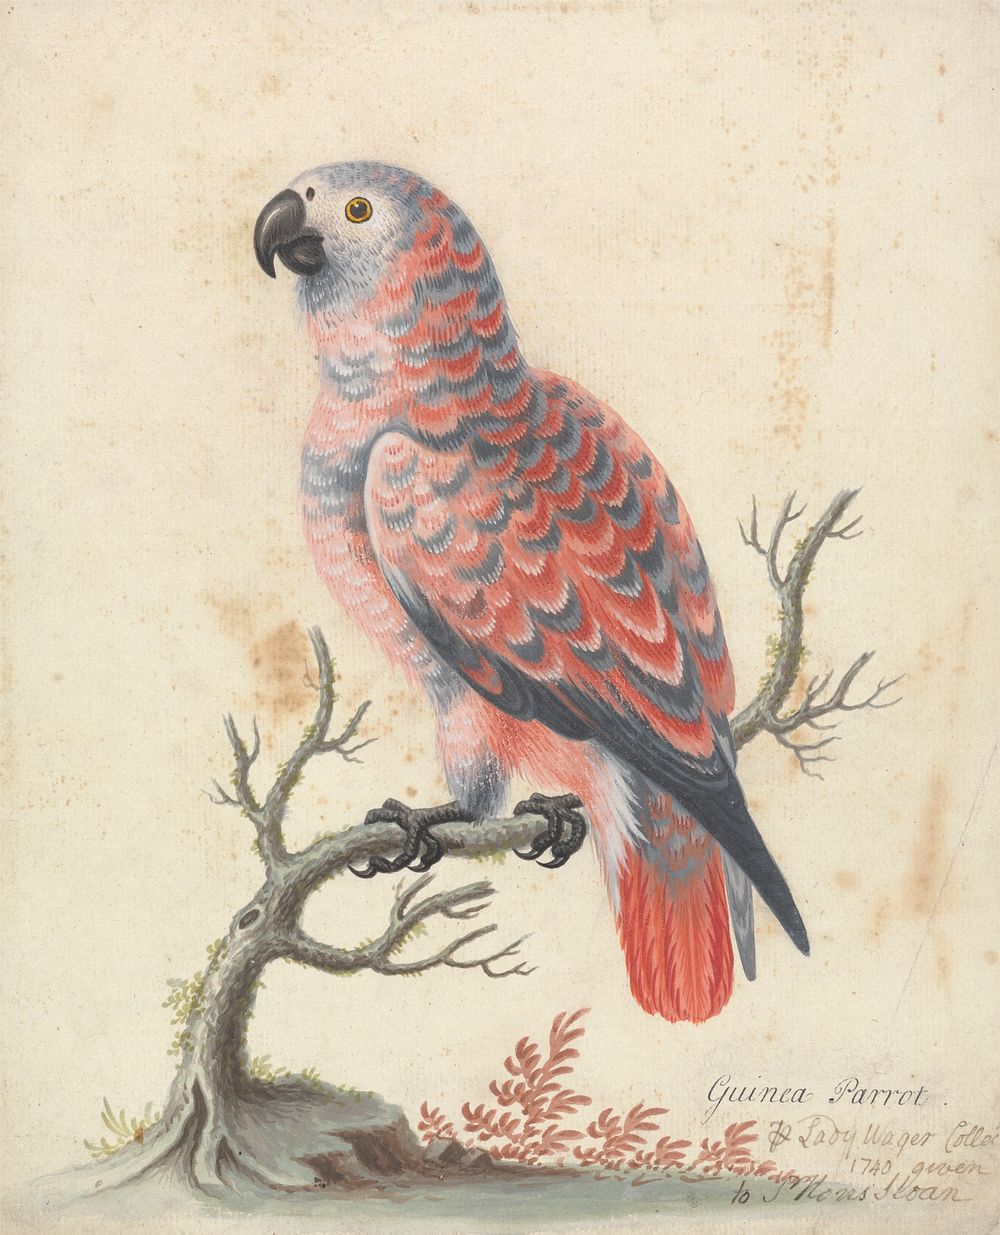 Guinea Parrot by George Edwards